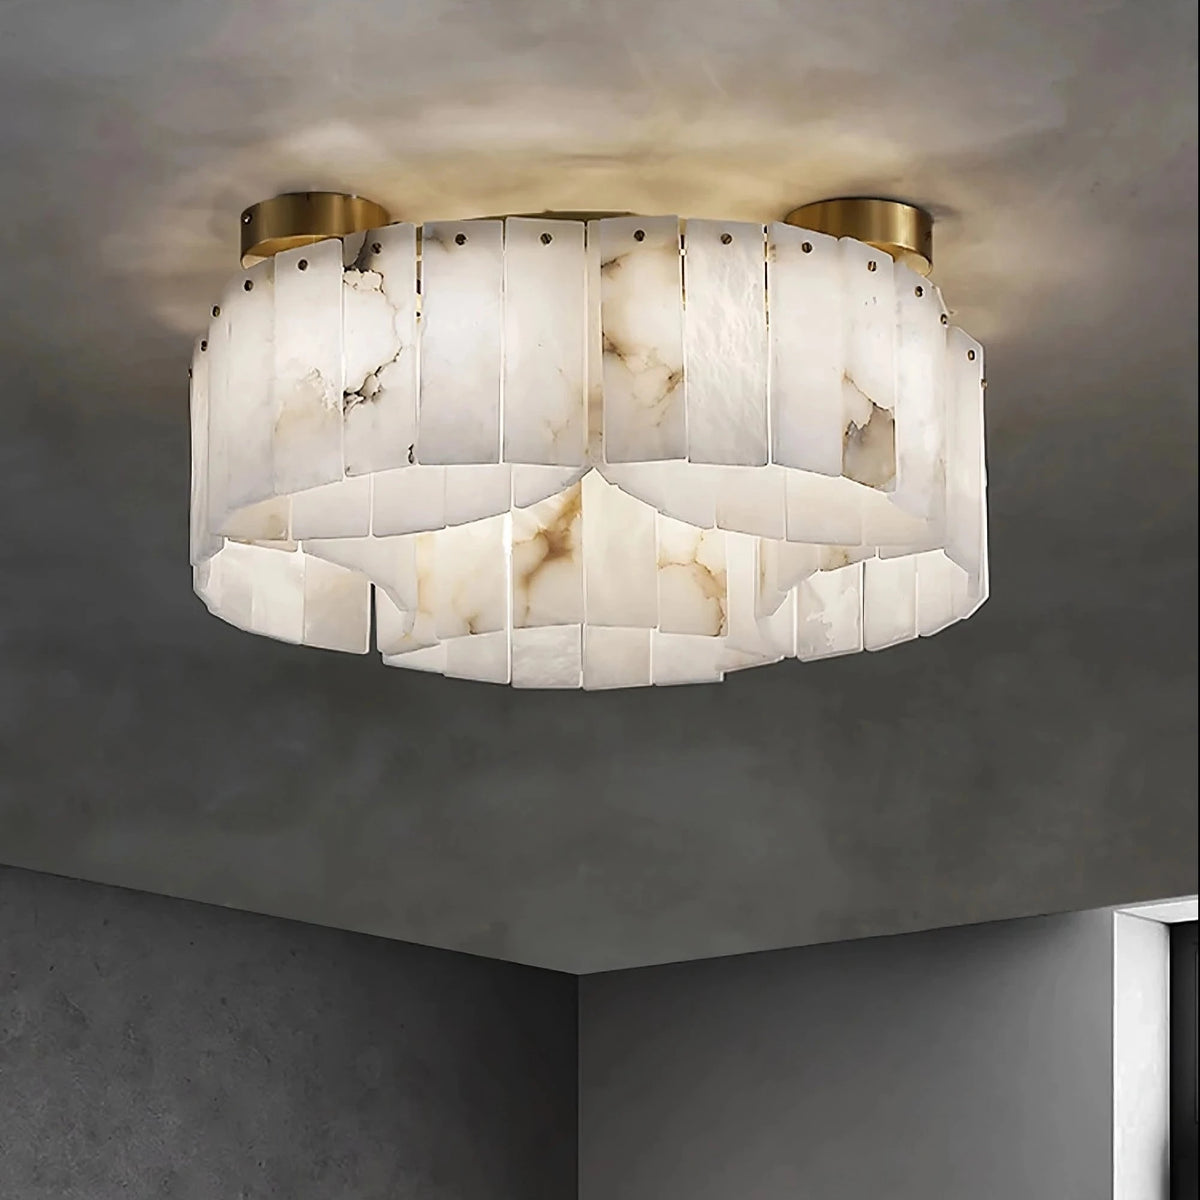 The Moonshade Natural Marble Ceiling Light Fixture by Morsale.com is a modern ceiling fixture with a circular design, featuring vertically arranged rectangular pieces crafted from natural marble and brass. It emits warm lighting and is mounted on a grey ceiling in a minimalist room with dark walls, enhancing the modern aesthetic.